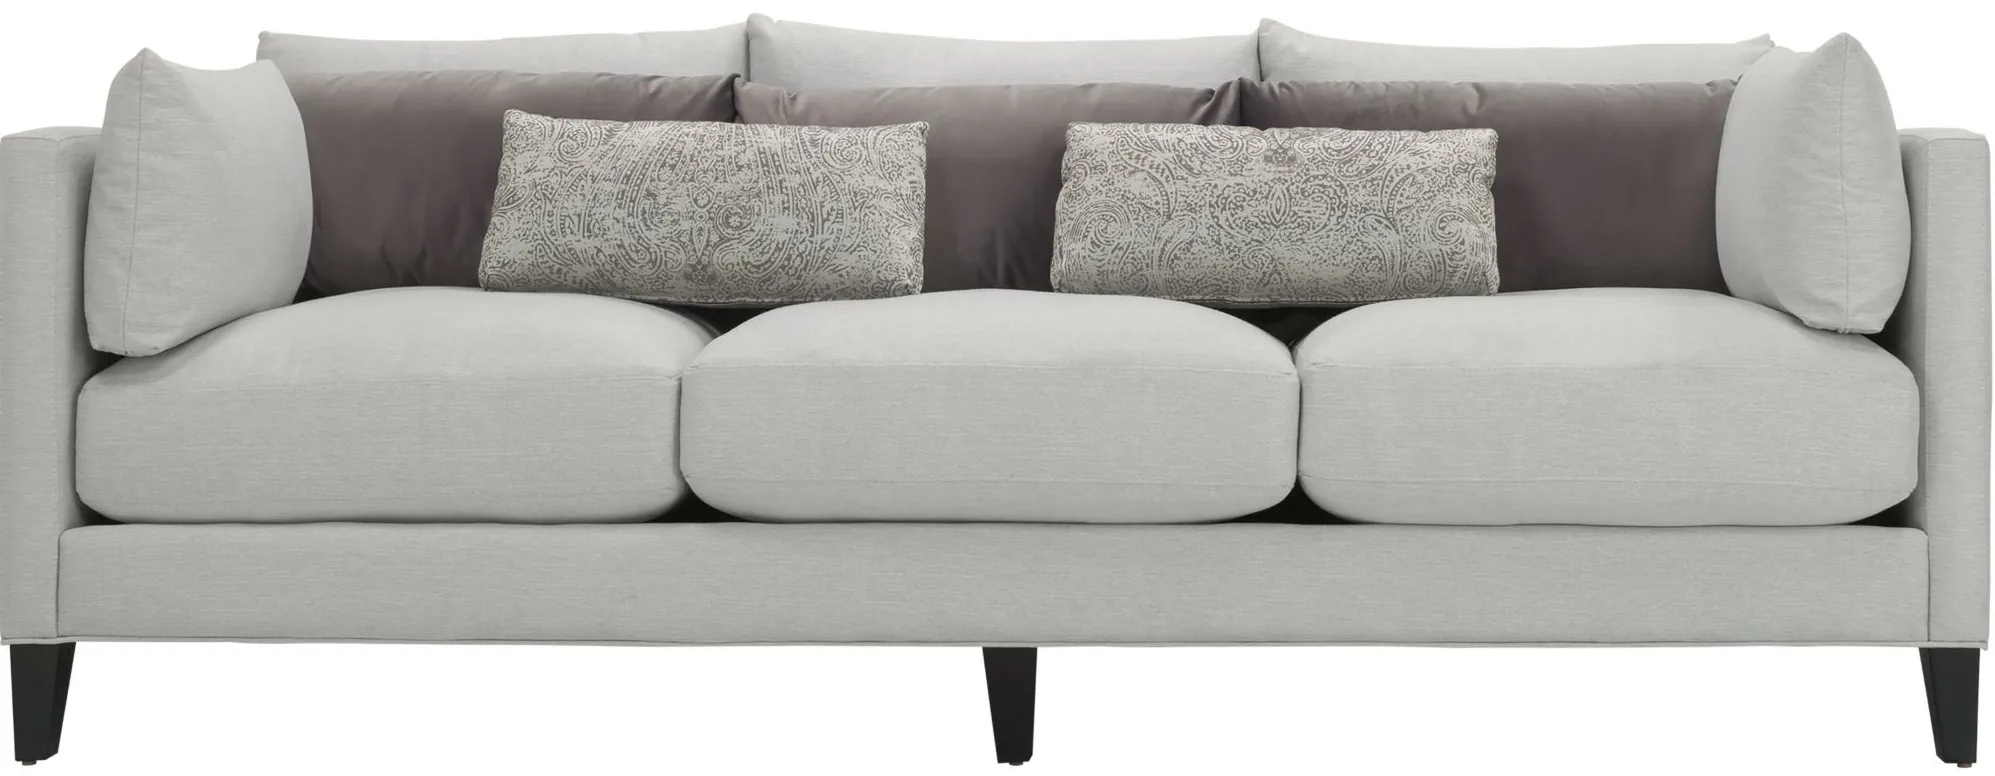 Cates Sofa in Dove by Jonathan Louis